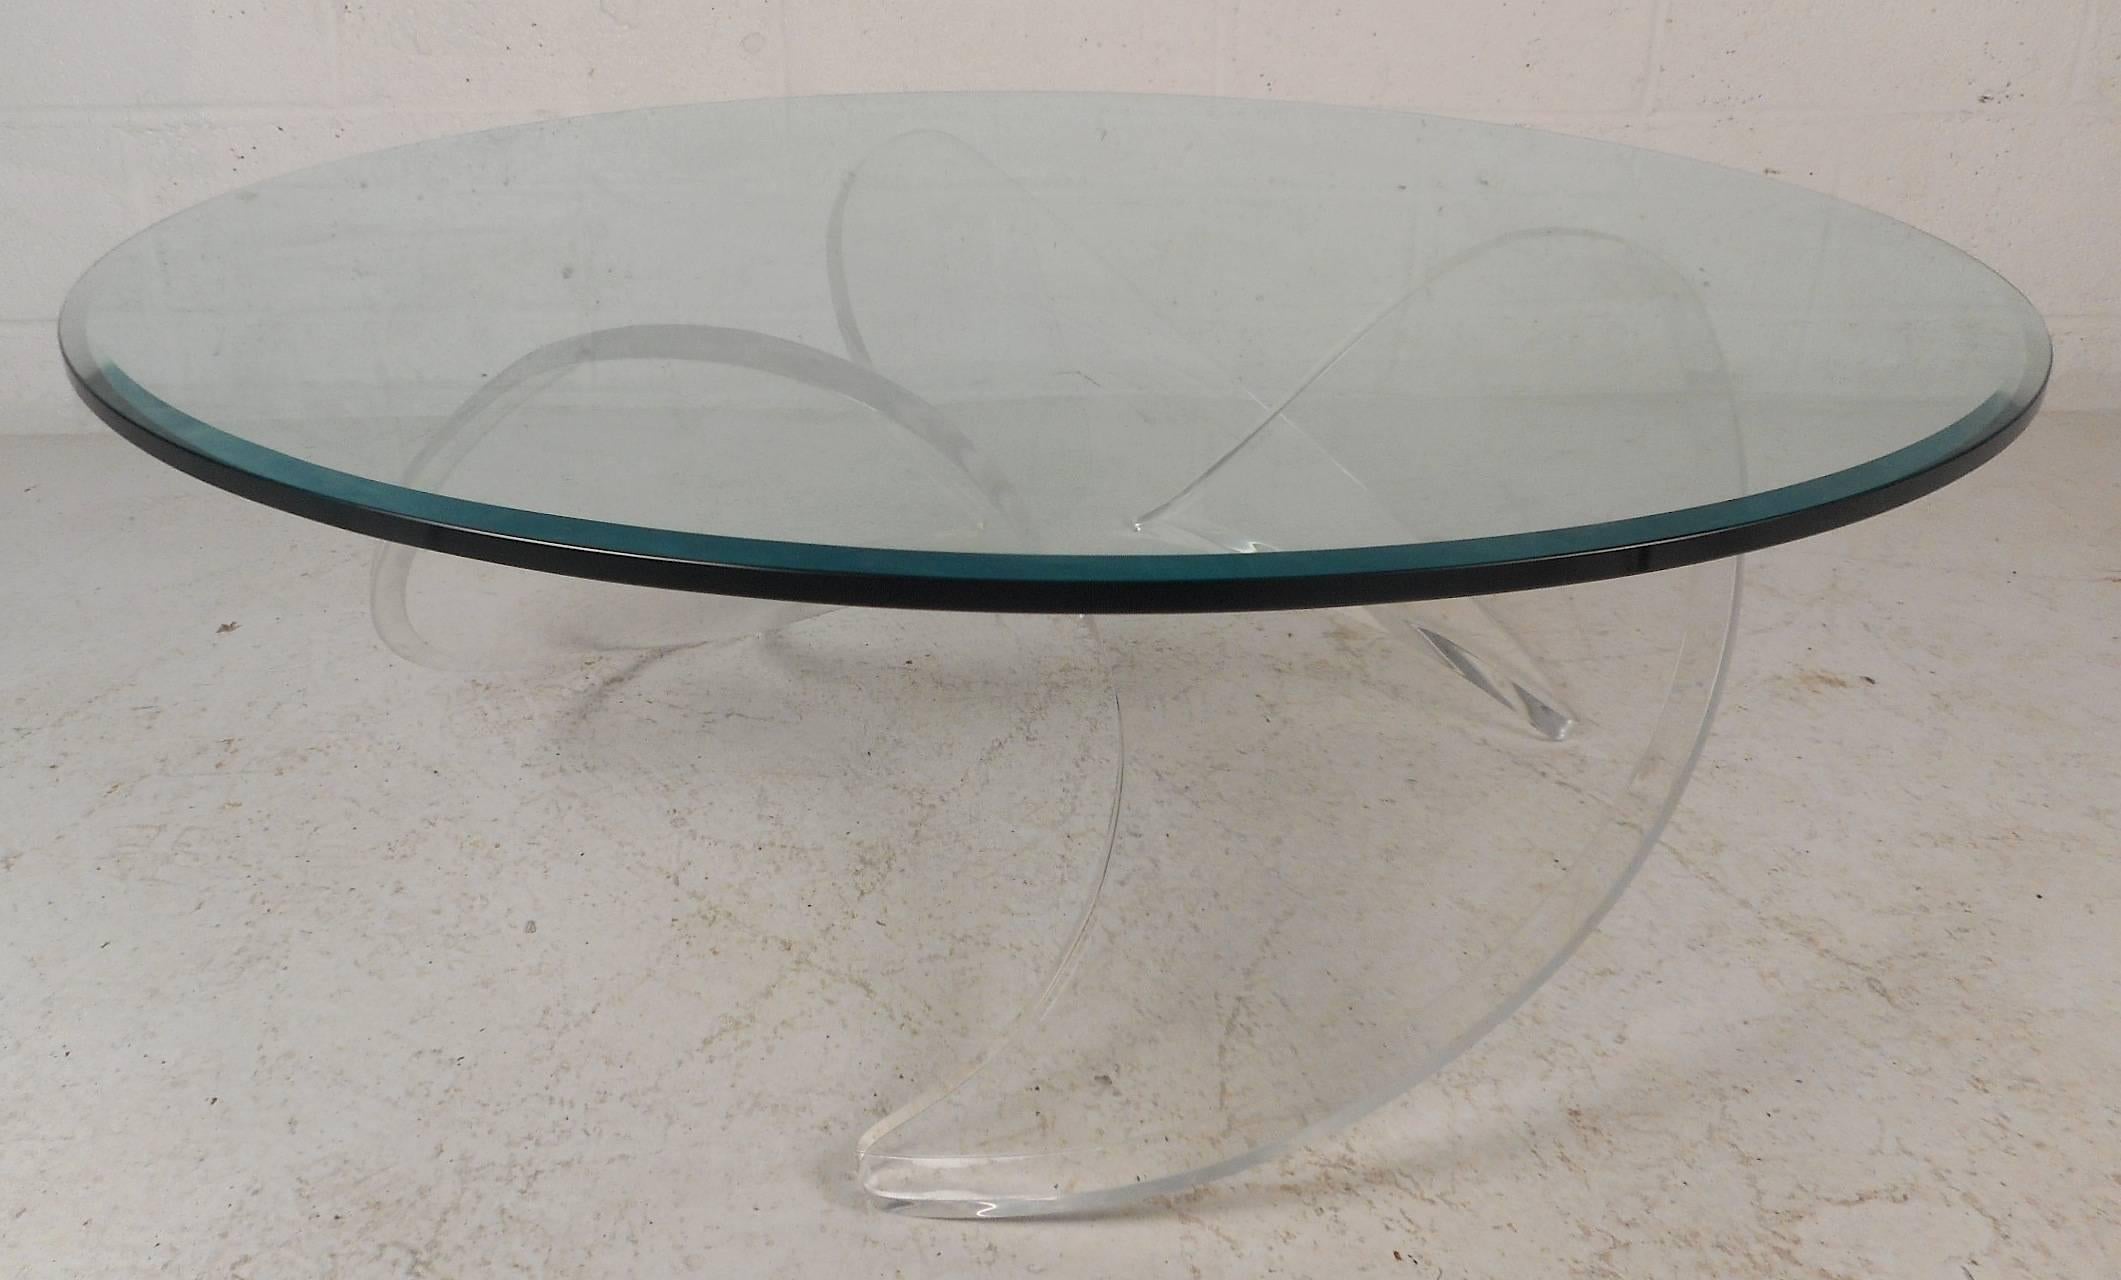 Gorgeous vintage modern coffee table with an unusual thick Lucite propeller shaped base and a round glass top. Sleek design features bevelled edges on the base and the thick glass top. This one of a kind stylish and sturdy piece makes the perfect